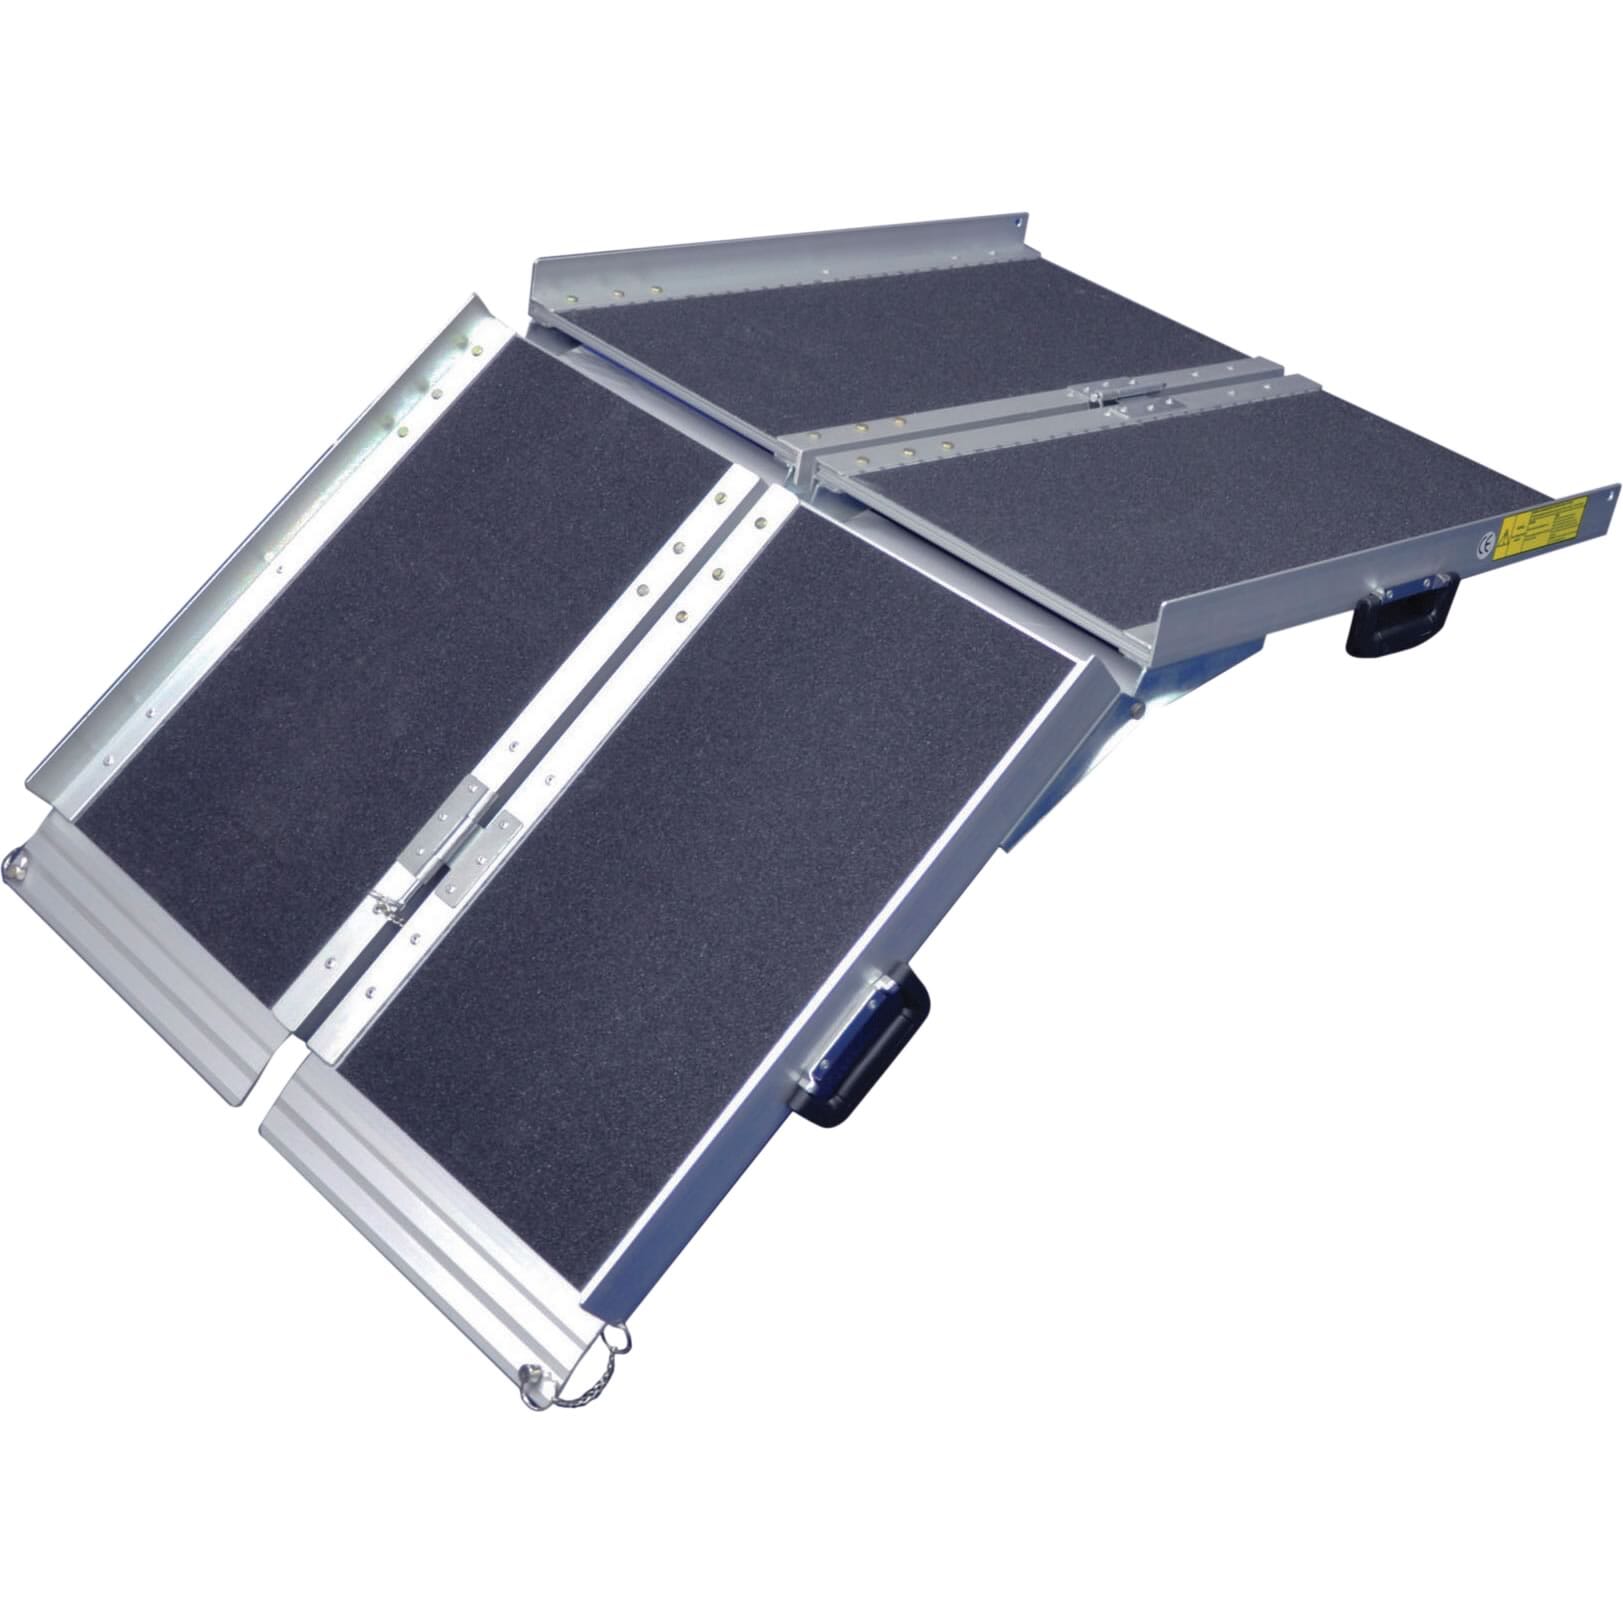 View TriFold Ramps 1220mm 4ft 114kg information